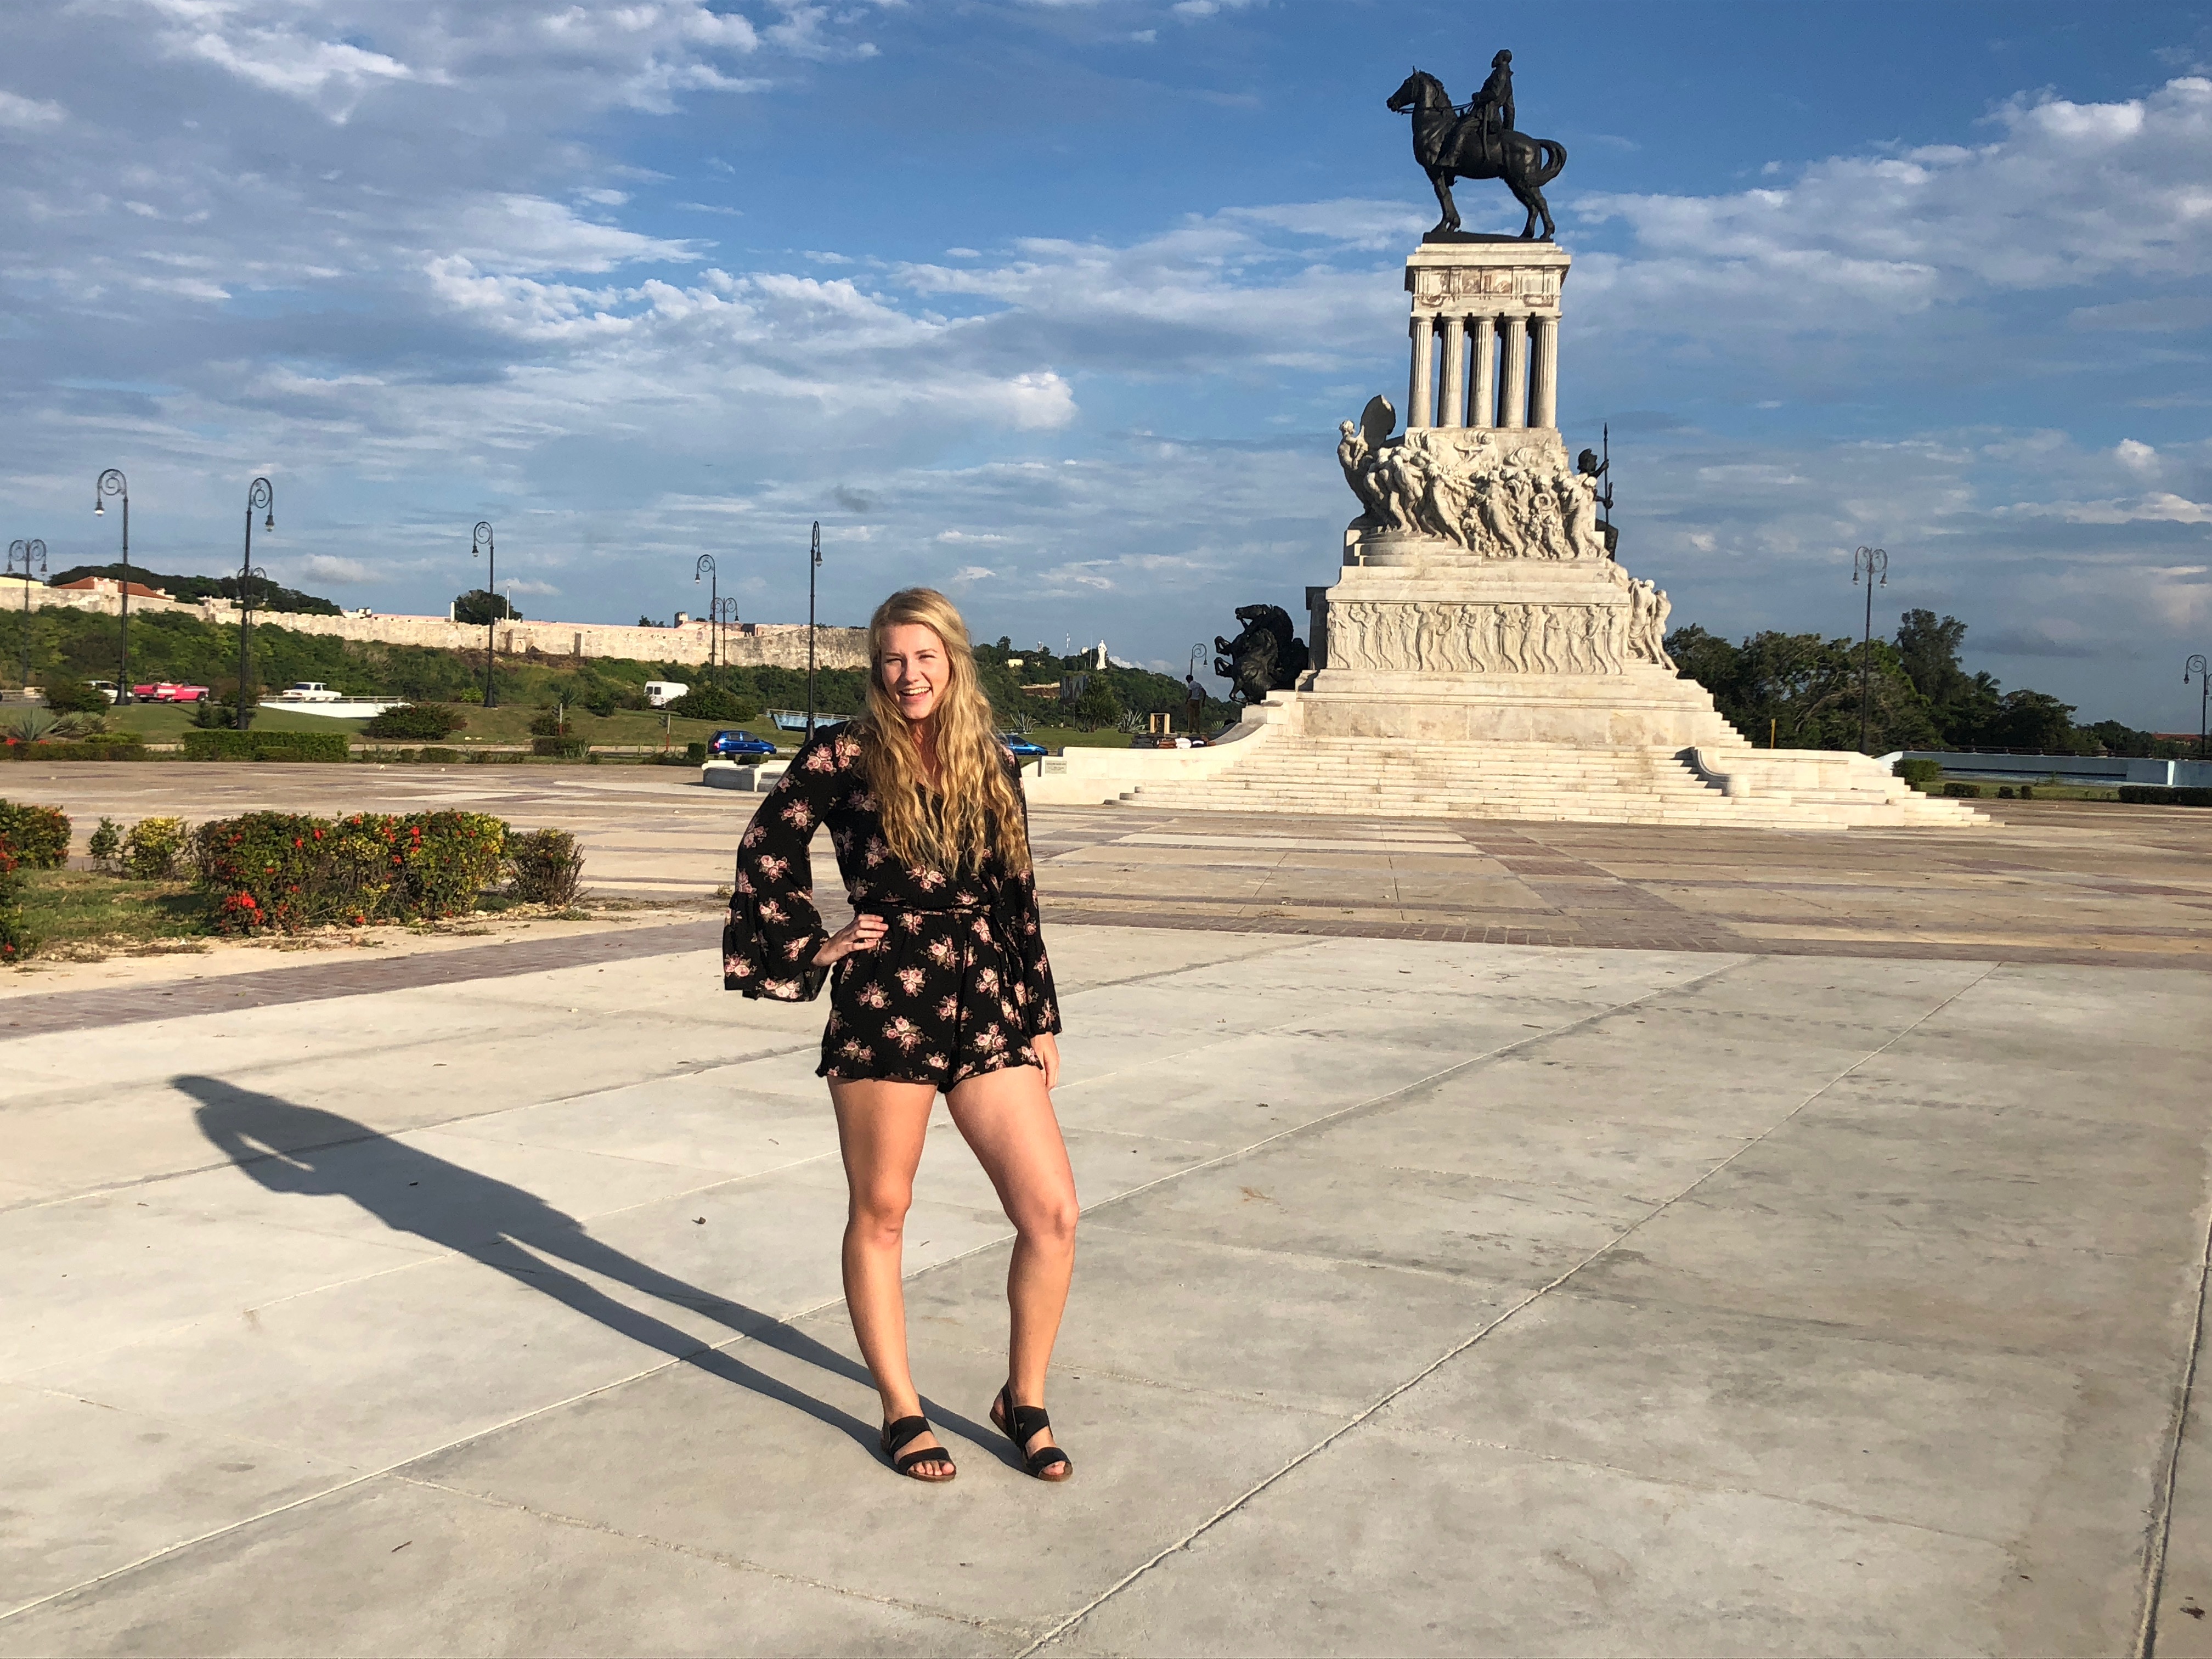 Lauren posing for the camera during her study abroad experience.